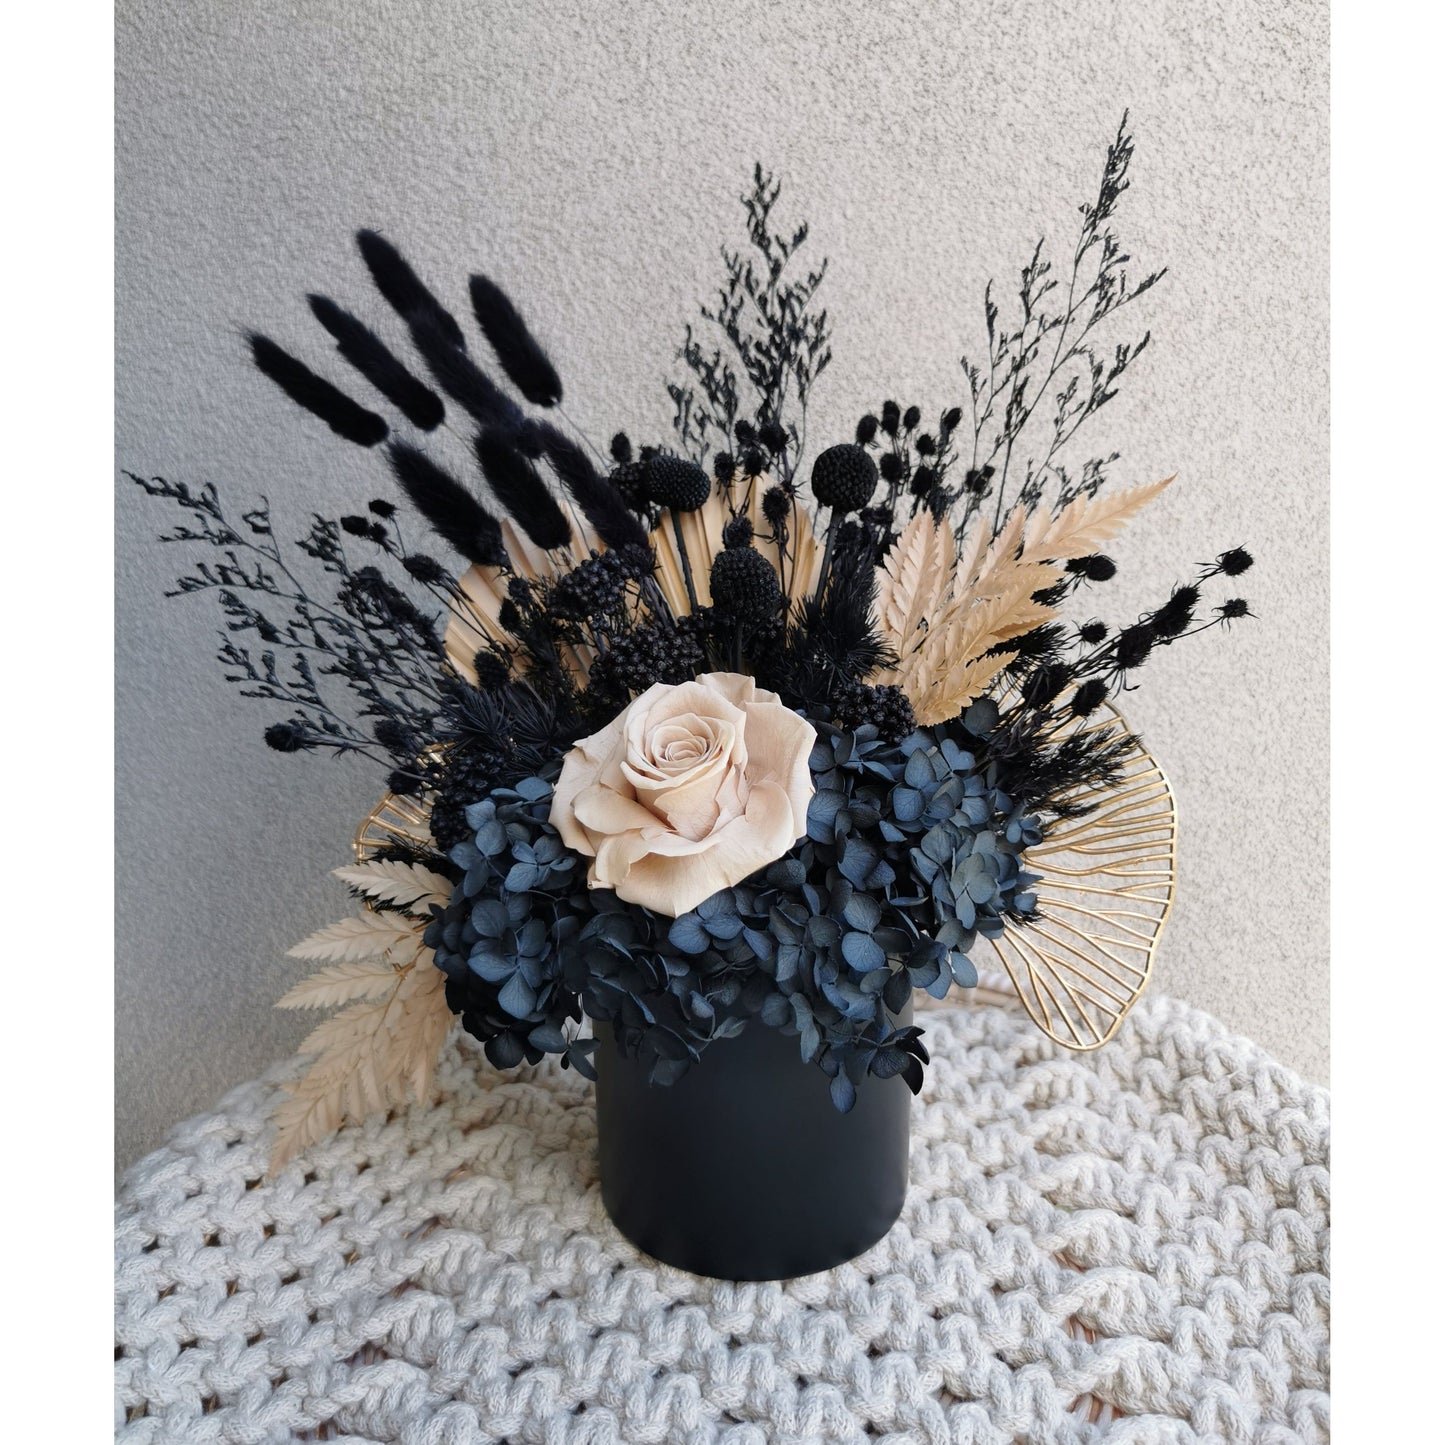 Black, nude & gold dried flowers set in to a black pot. Picture shows arrangement sitting on a tray being held up against a blank wall